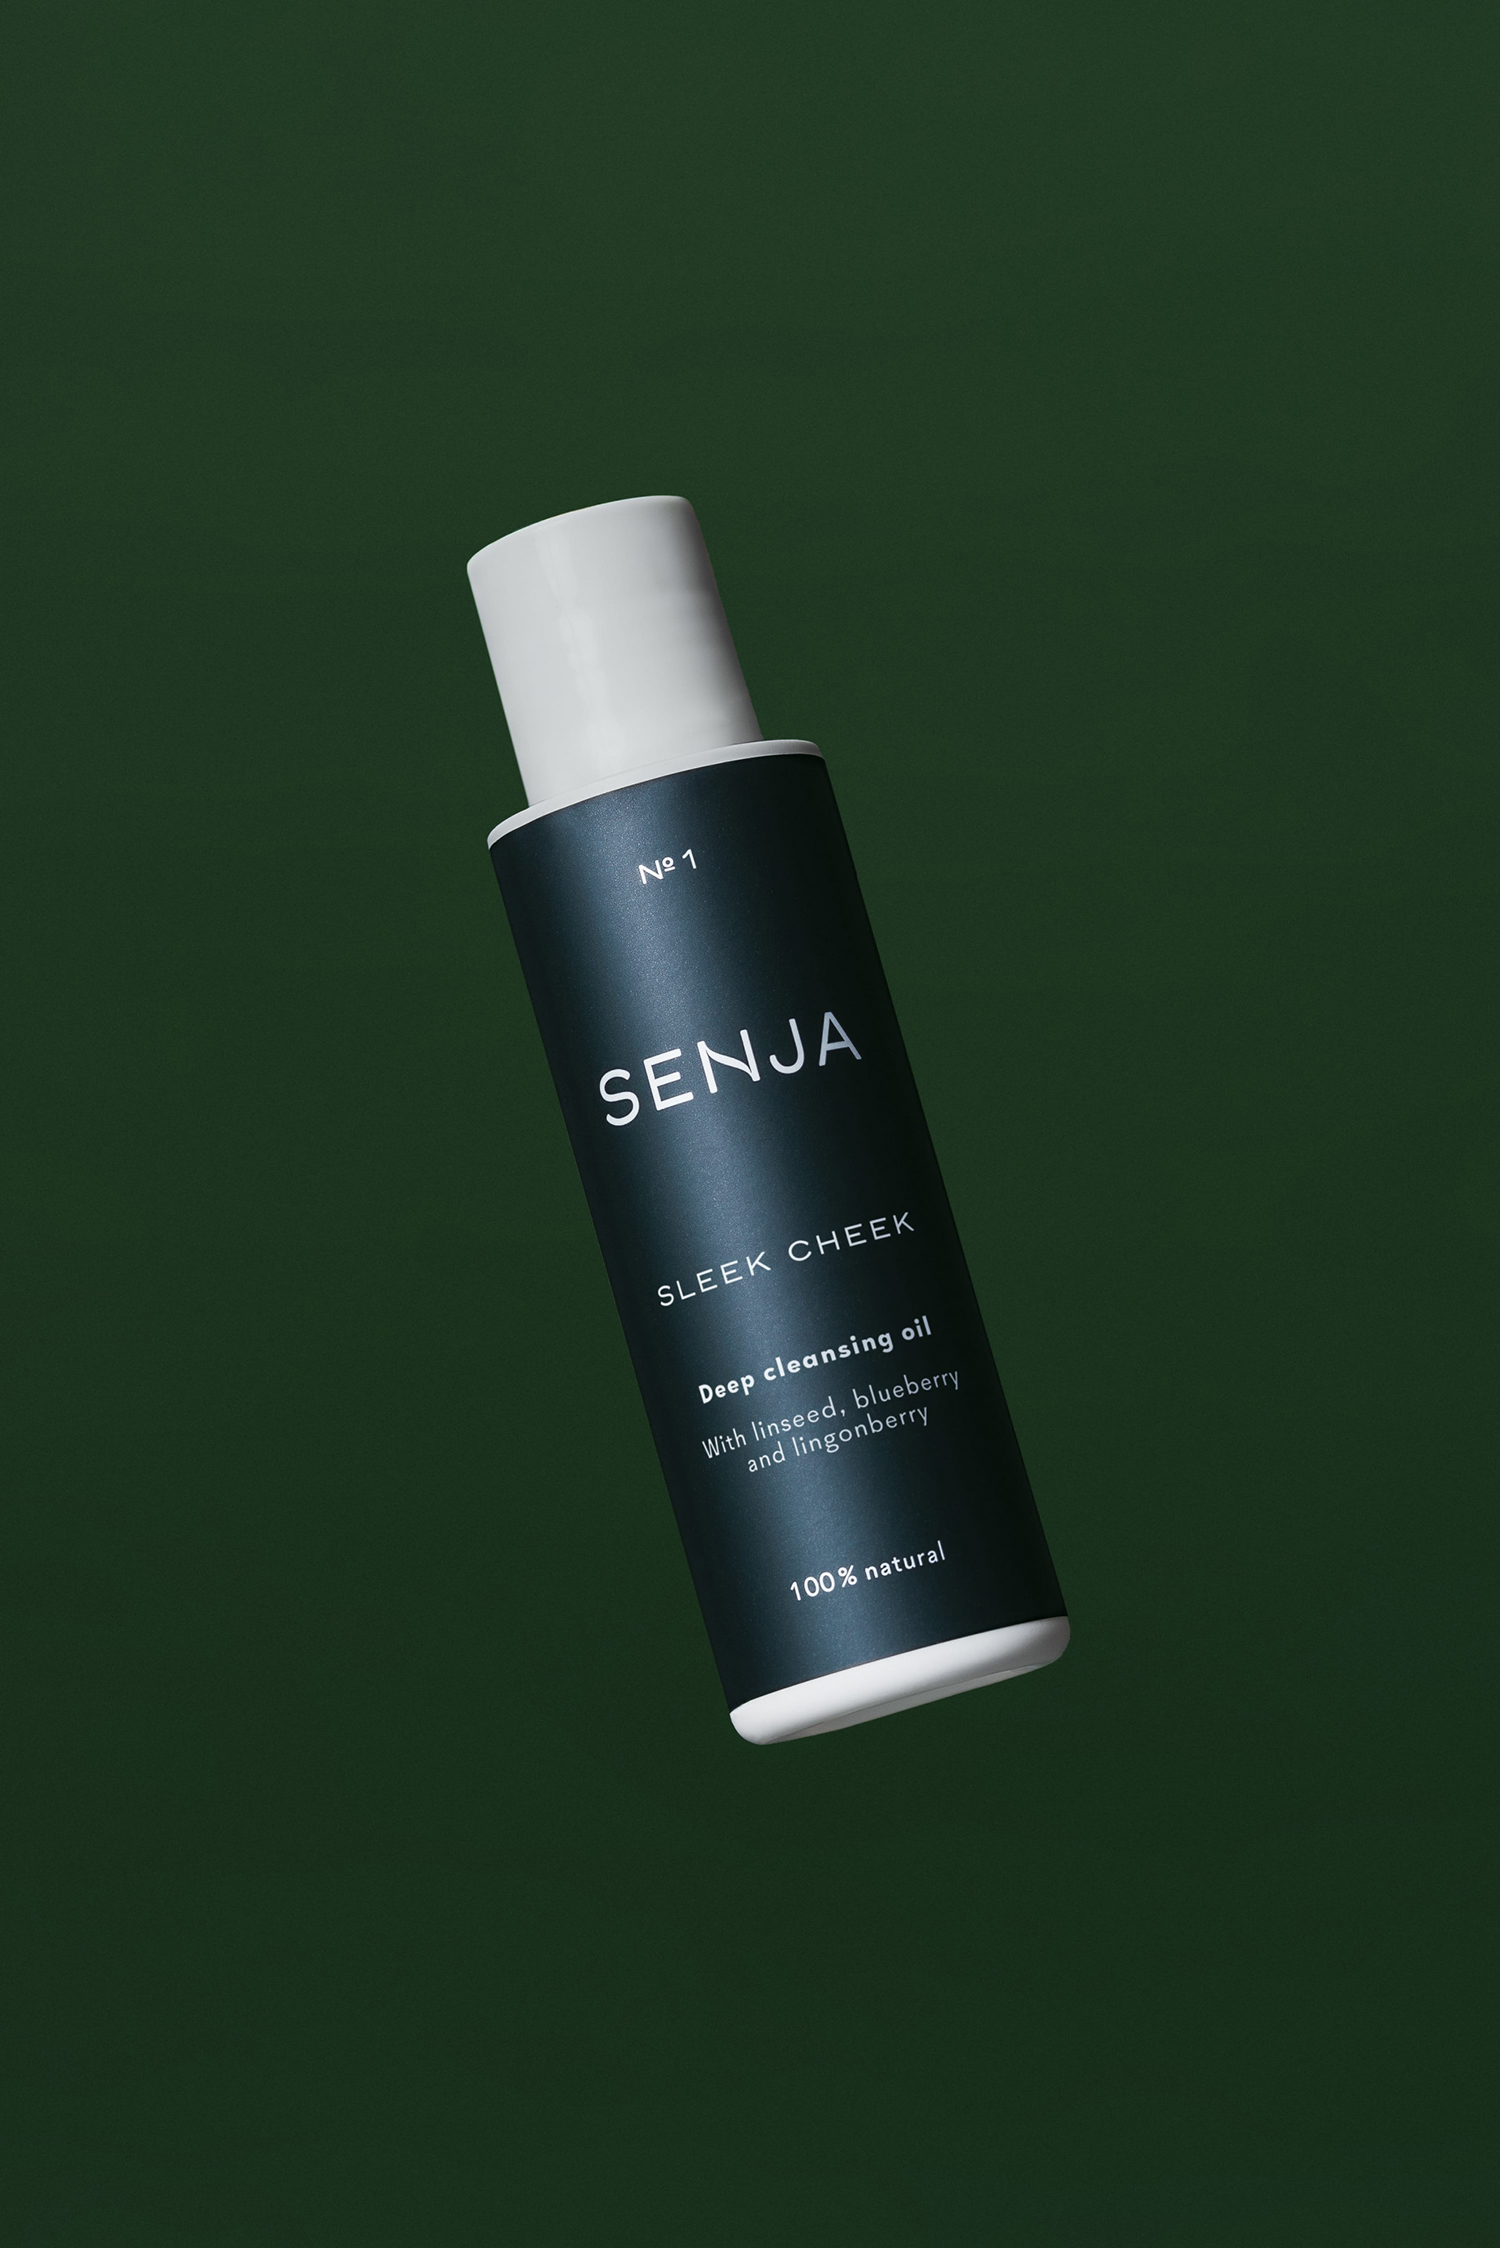 Logotype, packaging and still life imagery by Werklig for Finnish premium cosmetics brand Senja